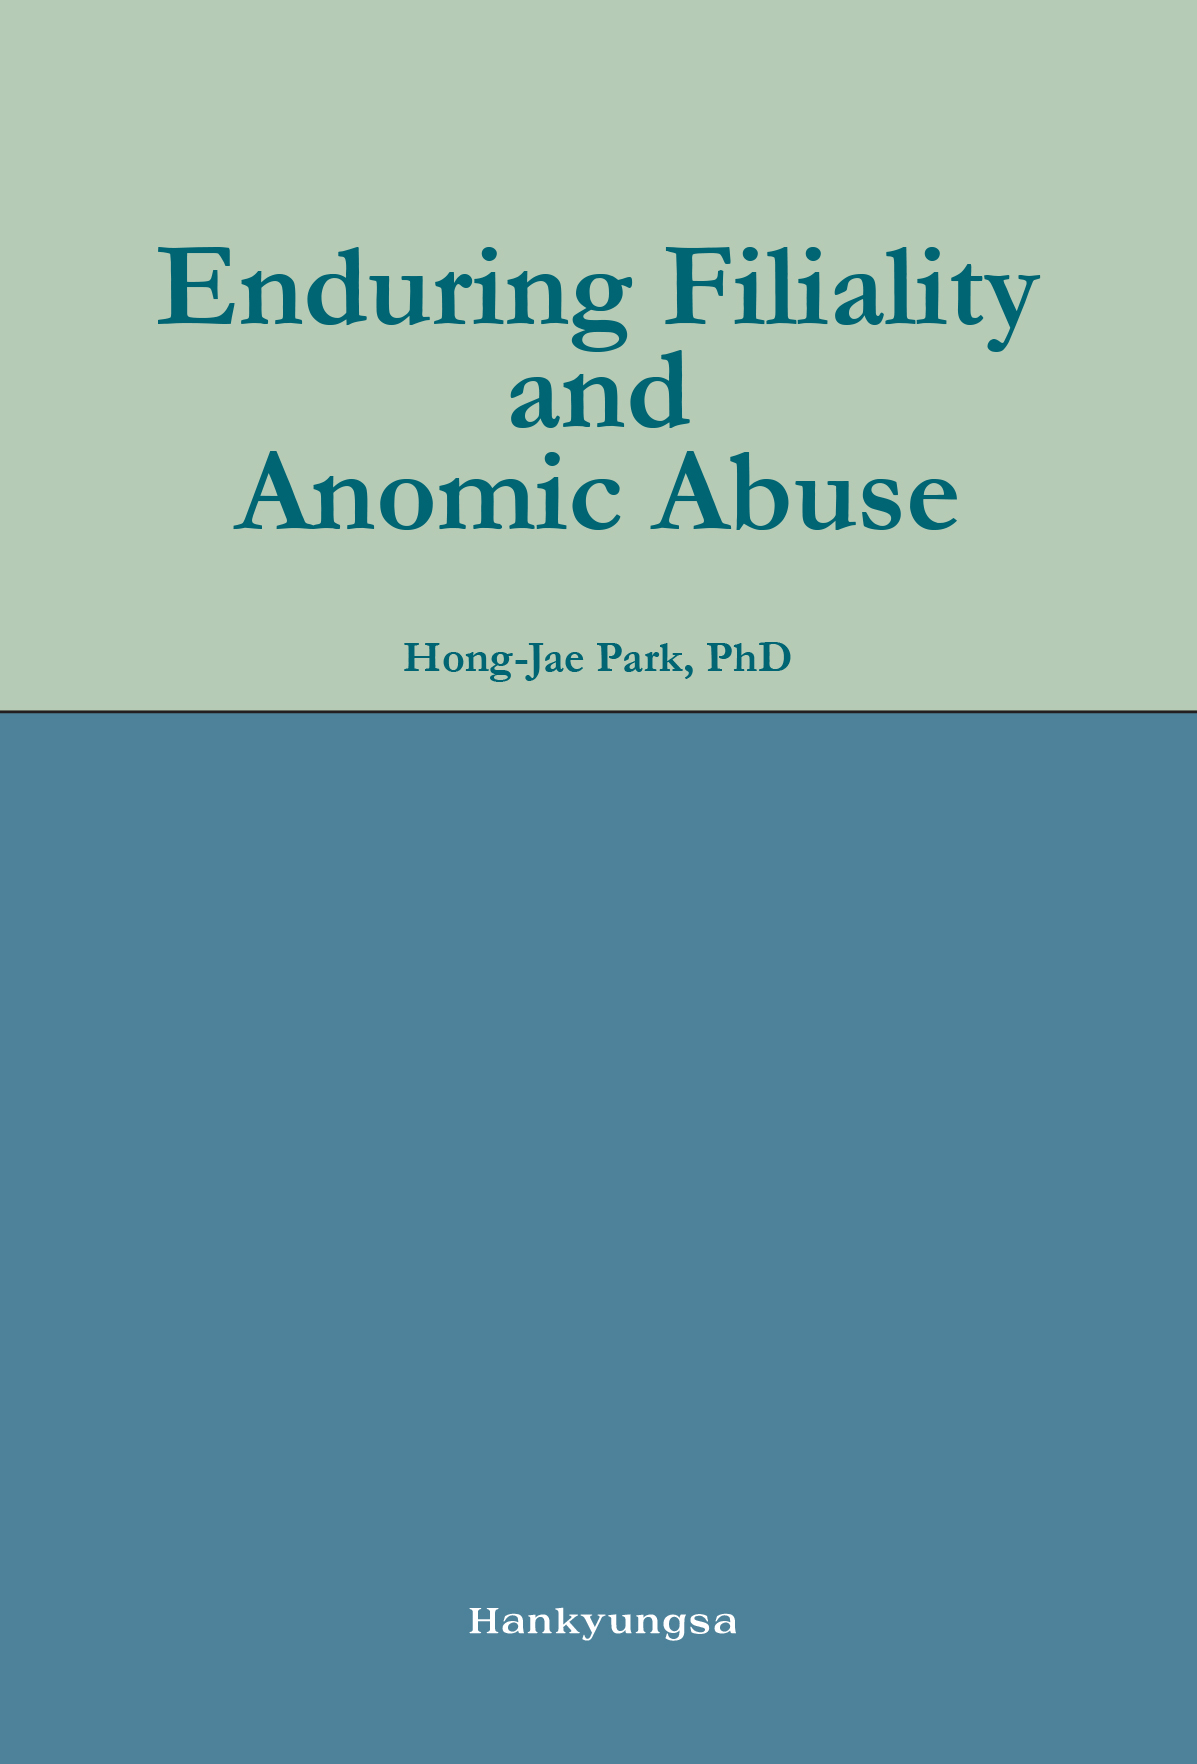 Enduring Filiality and Anomic Abuse